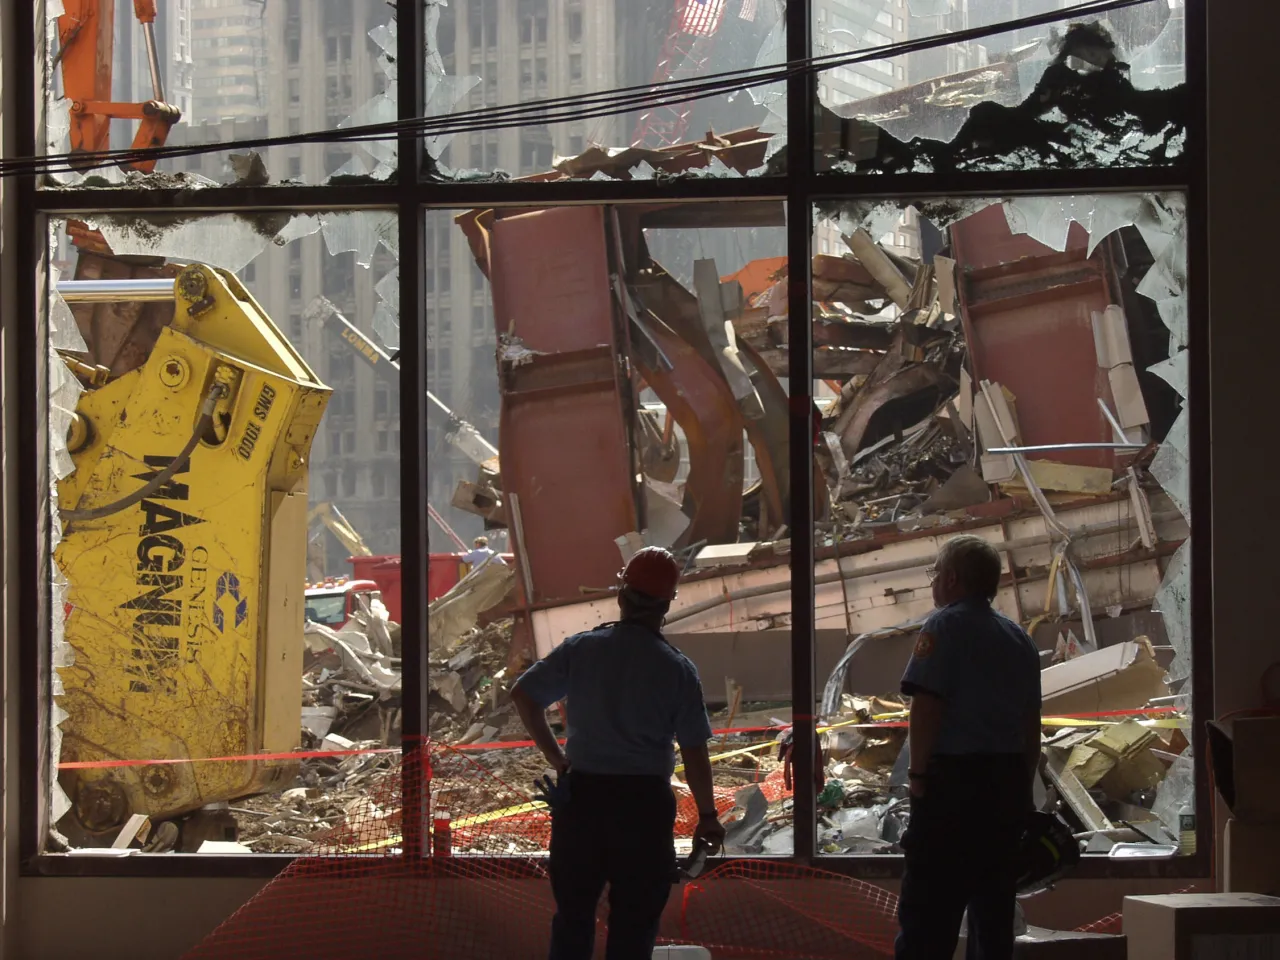 Image: 9/11 - Officials look through shattered windows of cleanup operations at Ground Zero